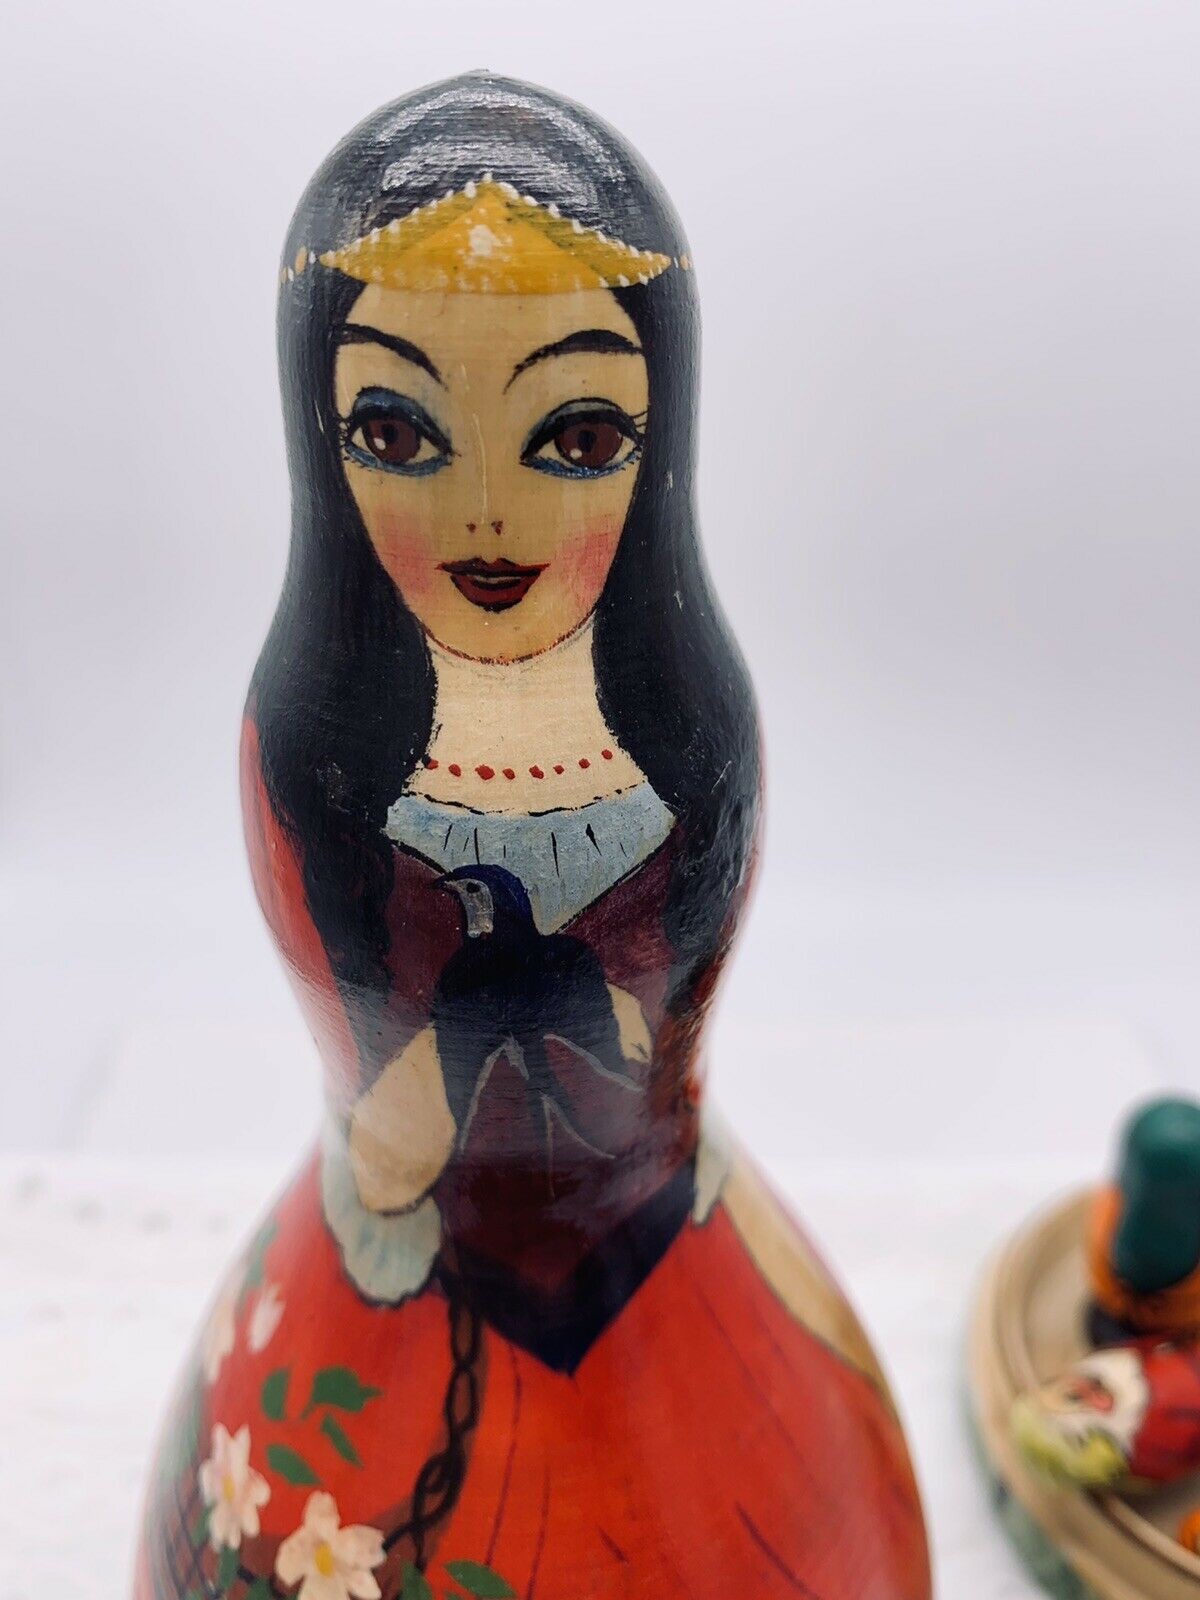 Russian Snow White, Hand Painted Wooden Nesting Type Doll, Dwarves Inside